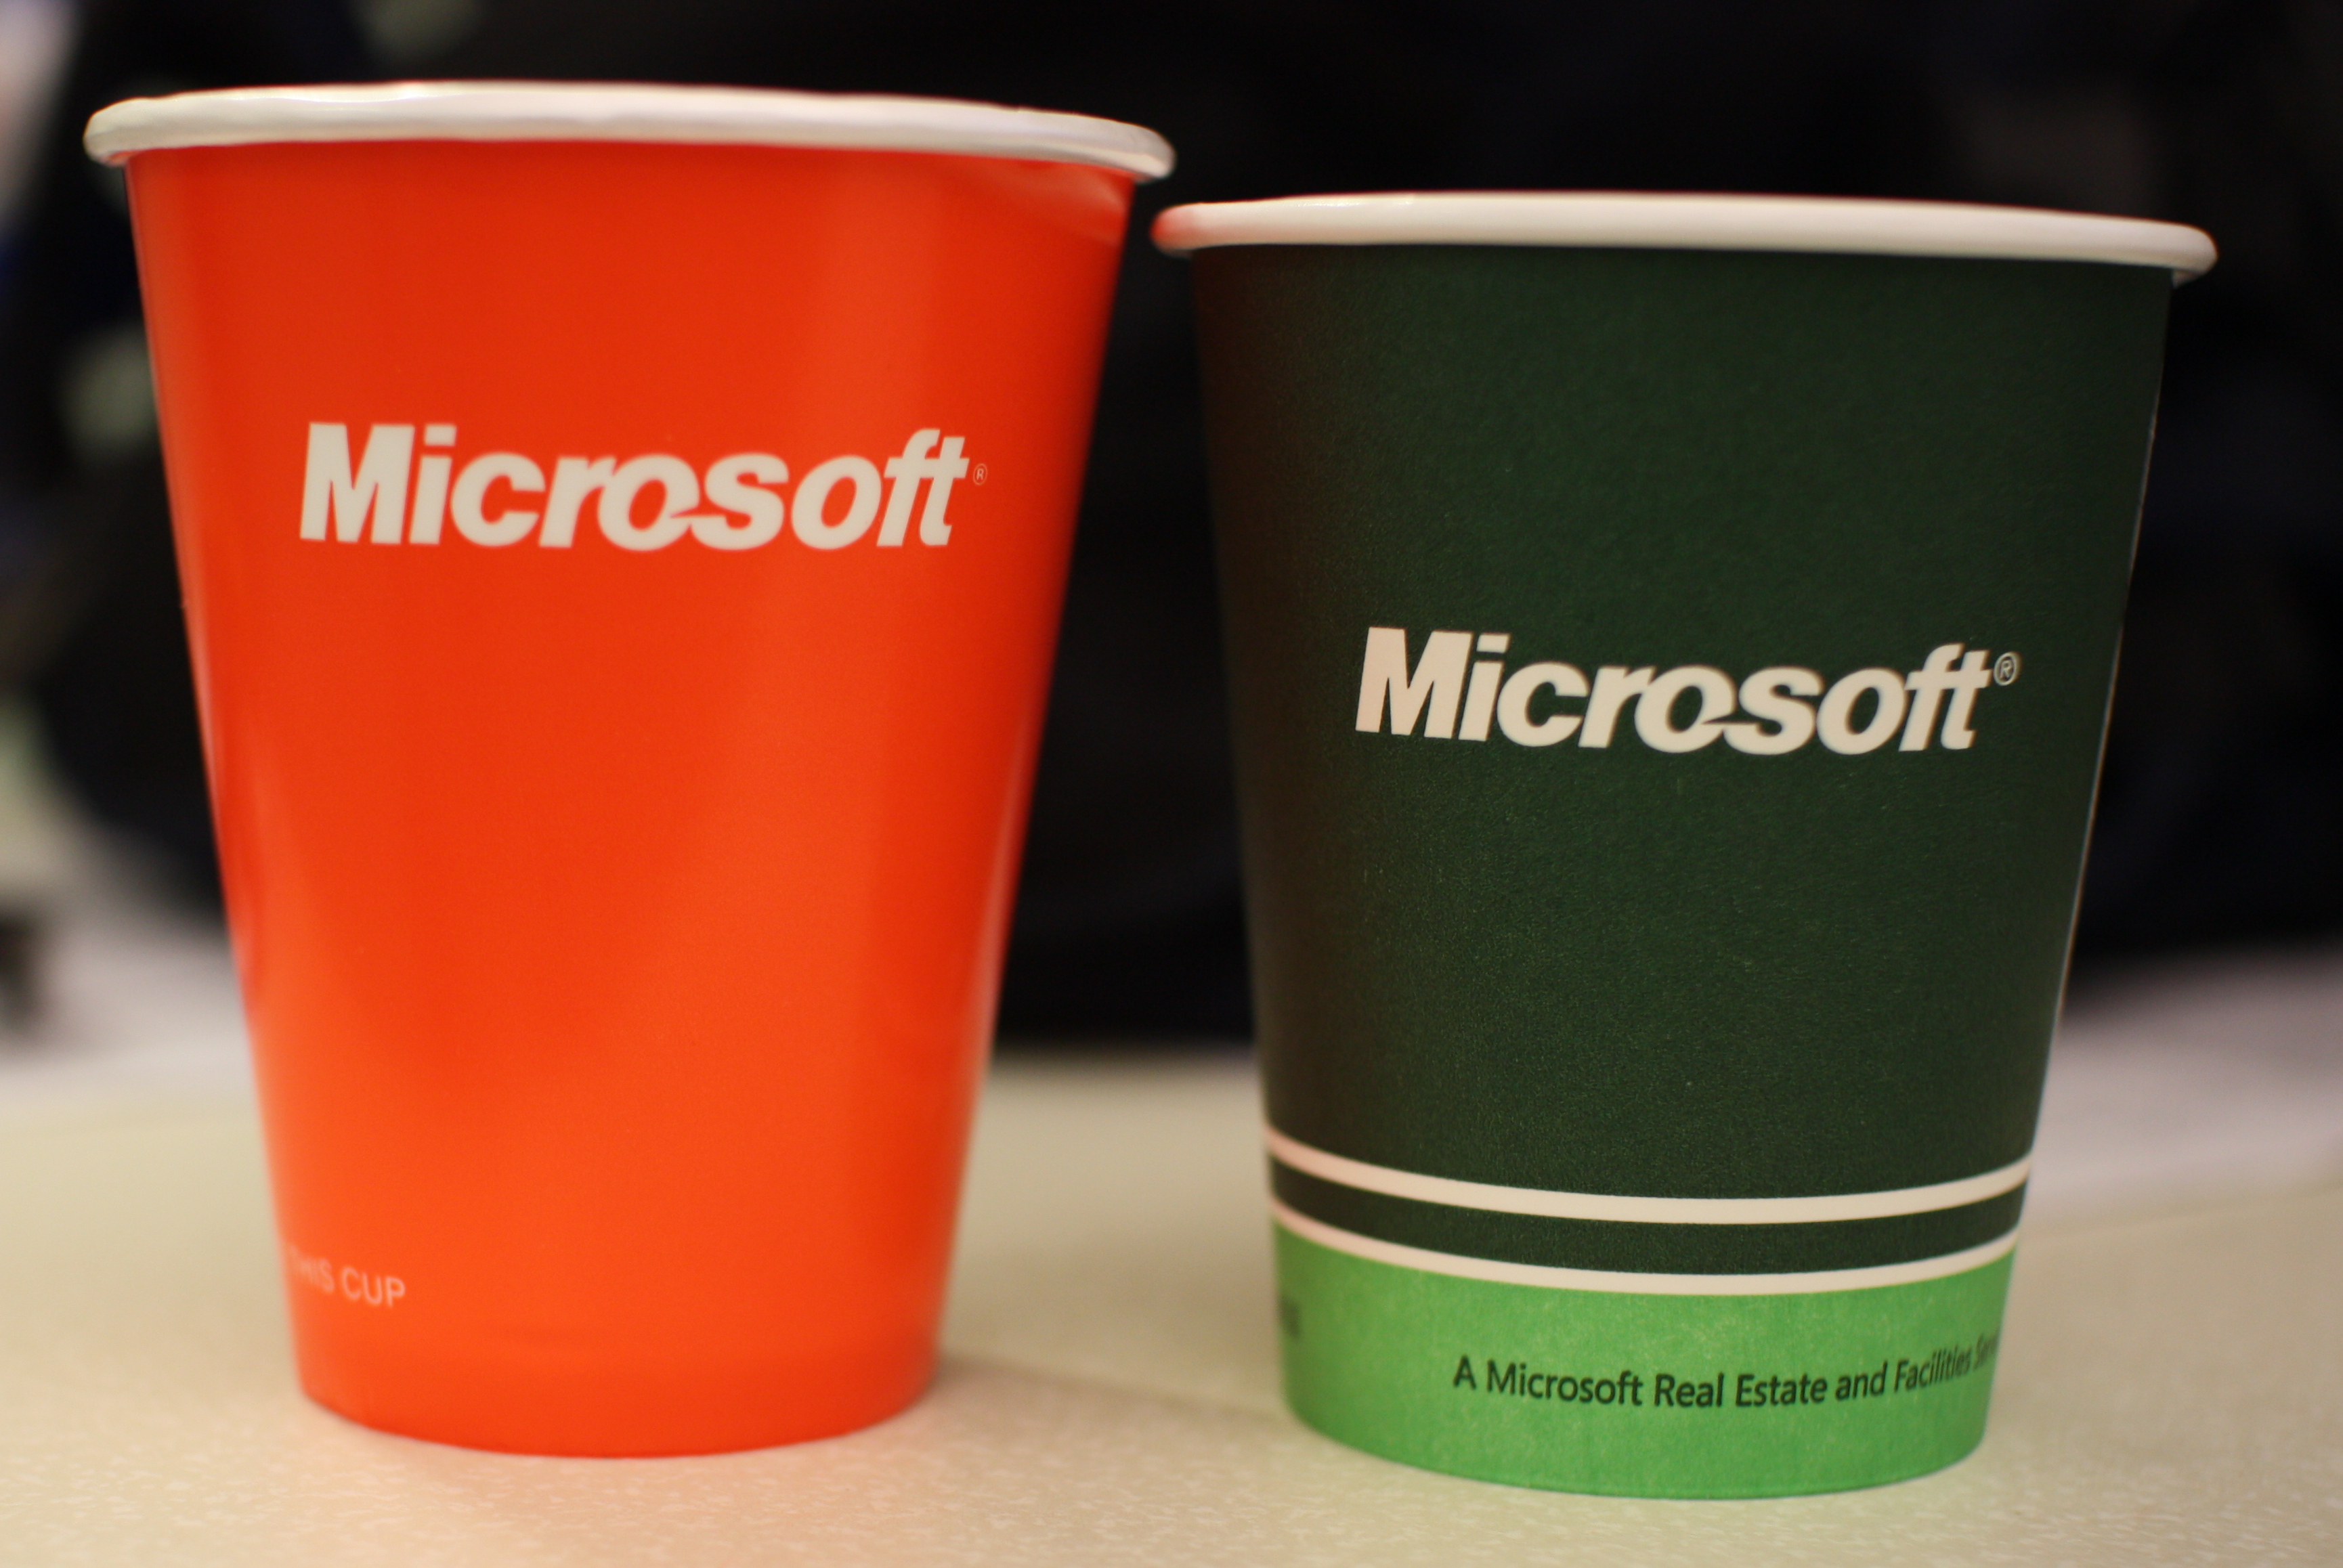 The Microsoft Cup: Old and New